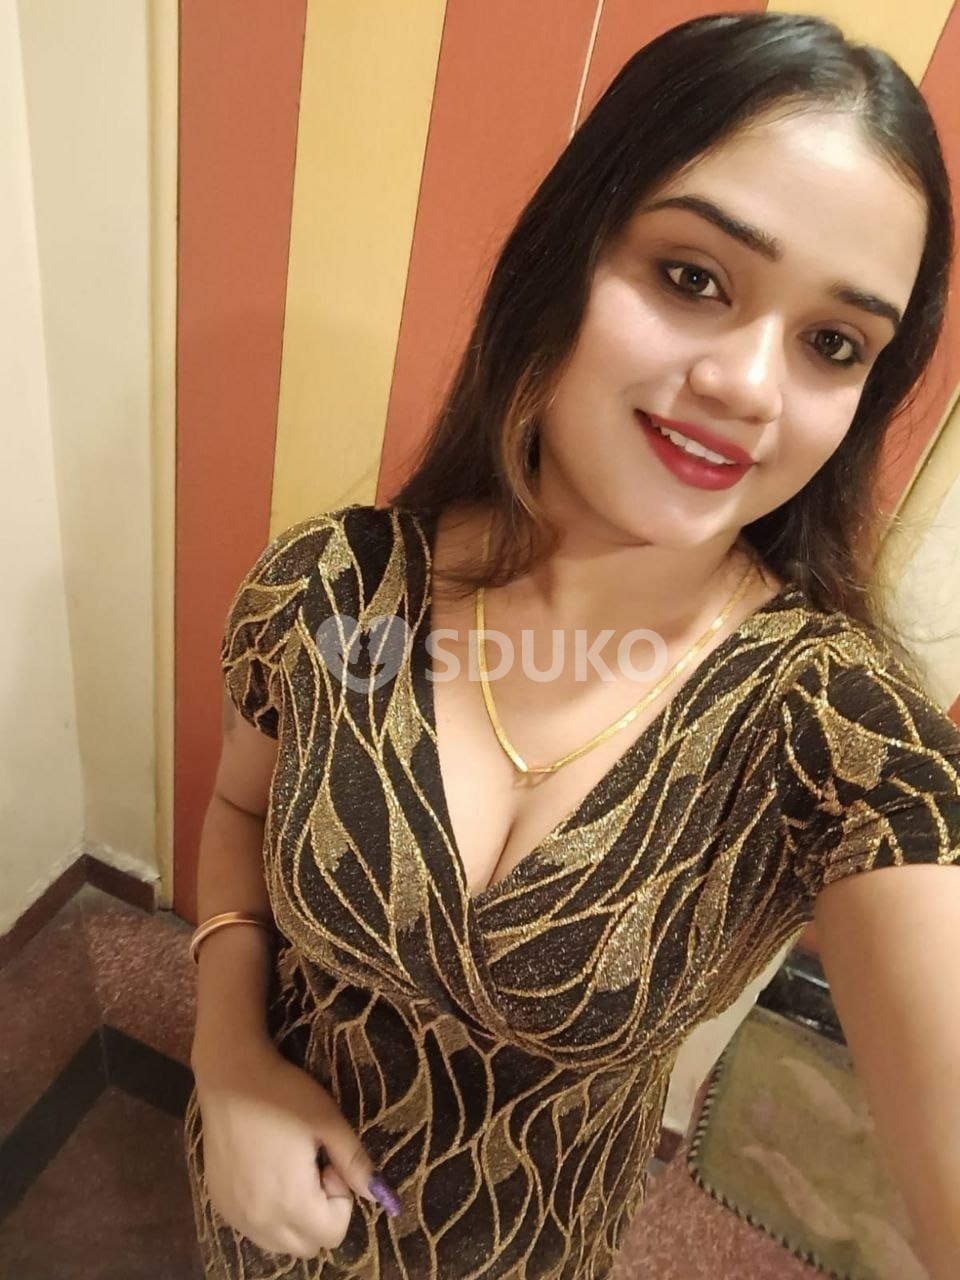 RISHIKESH TOP MODEL (VIP)BEST HIGH PROFILE CALL GIRL FOR SEX AND SETISFACATION